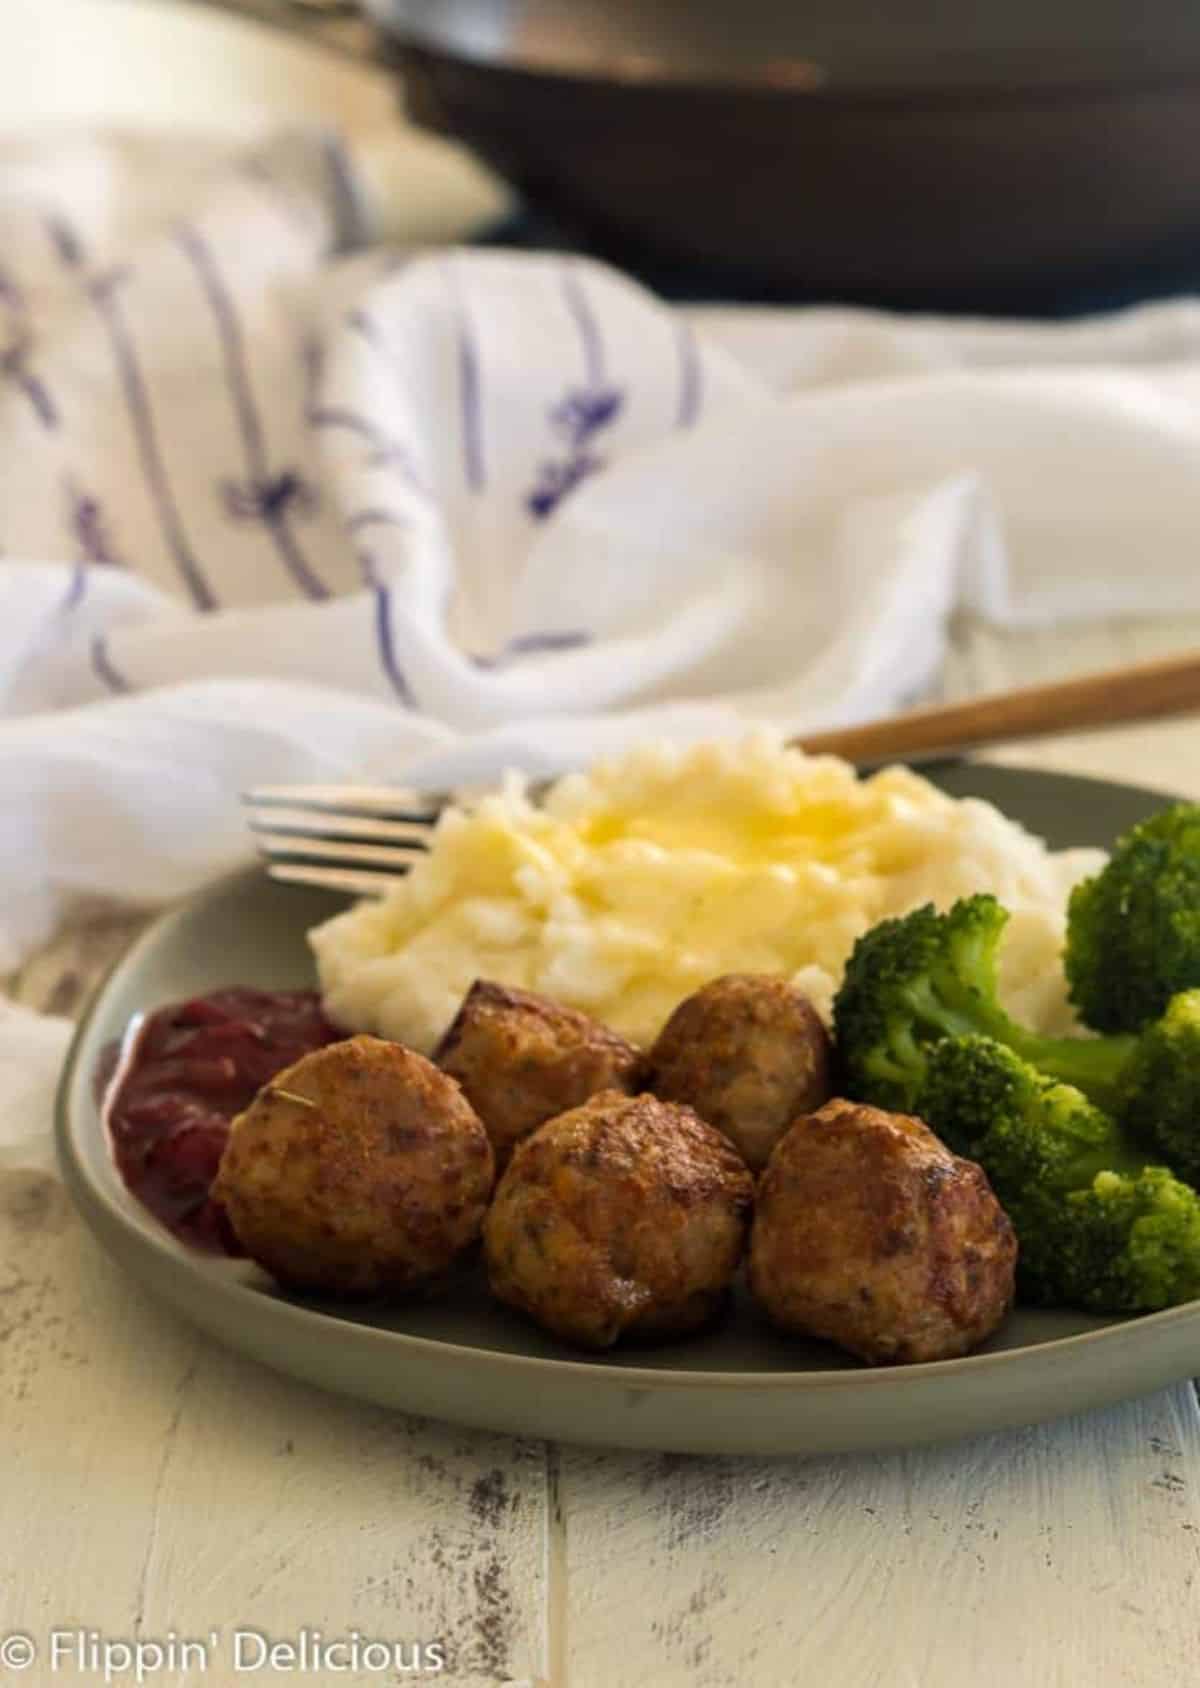 Scrumptious Gluten Free Meatballs with broccoli and mashed potatoes on a gray plate with a fork.